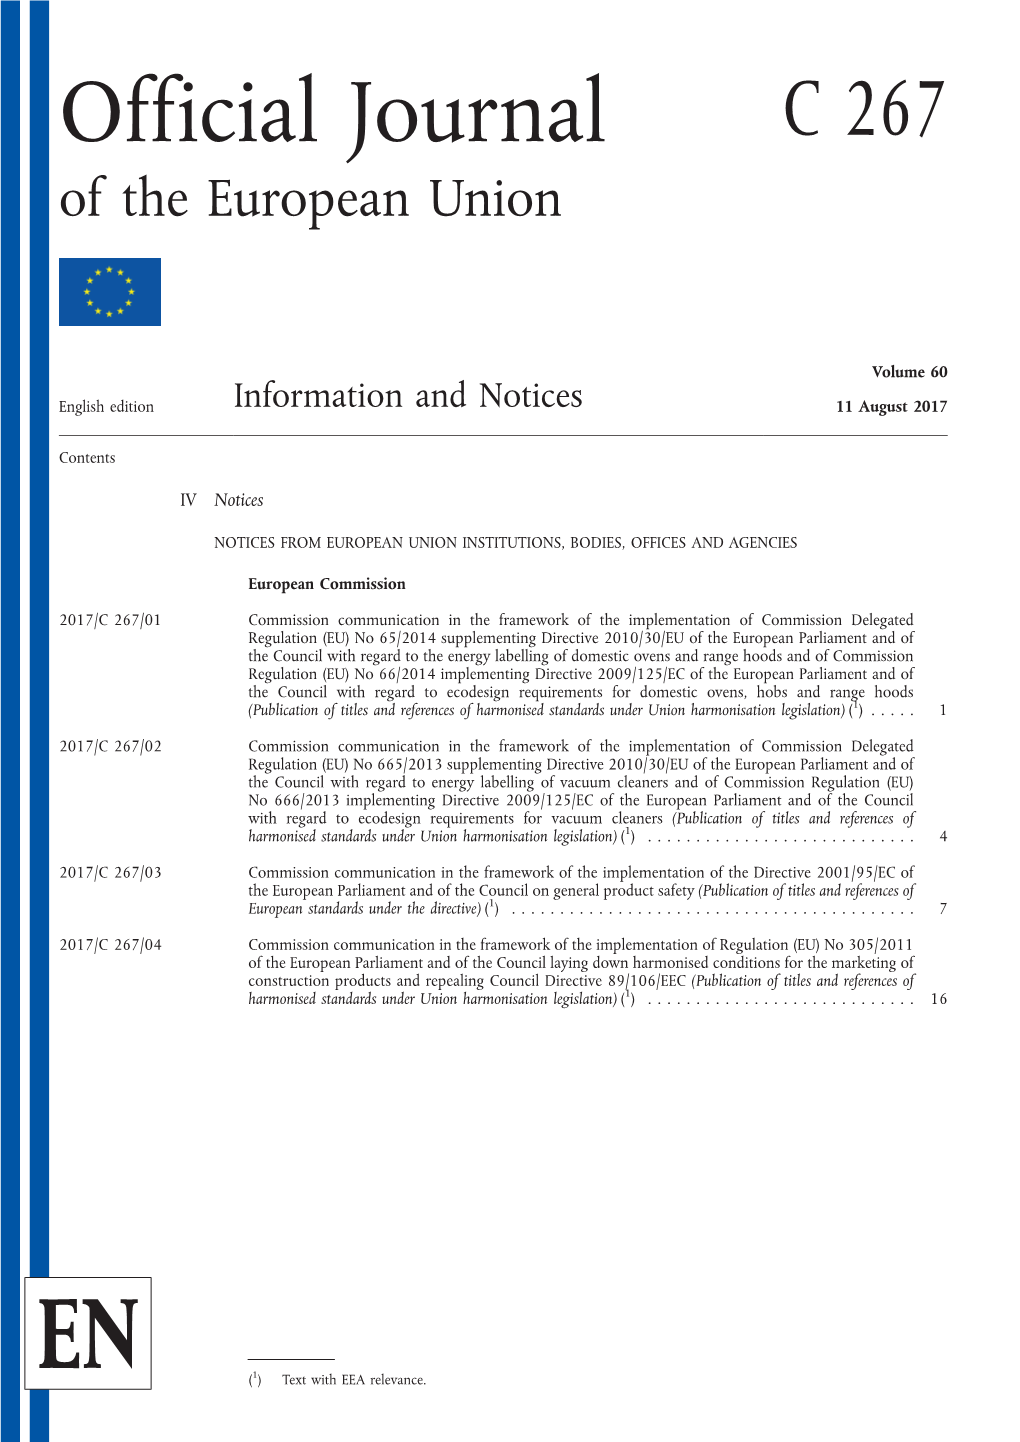 Official Journal of the European Union C 267/1